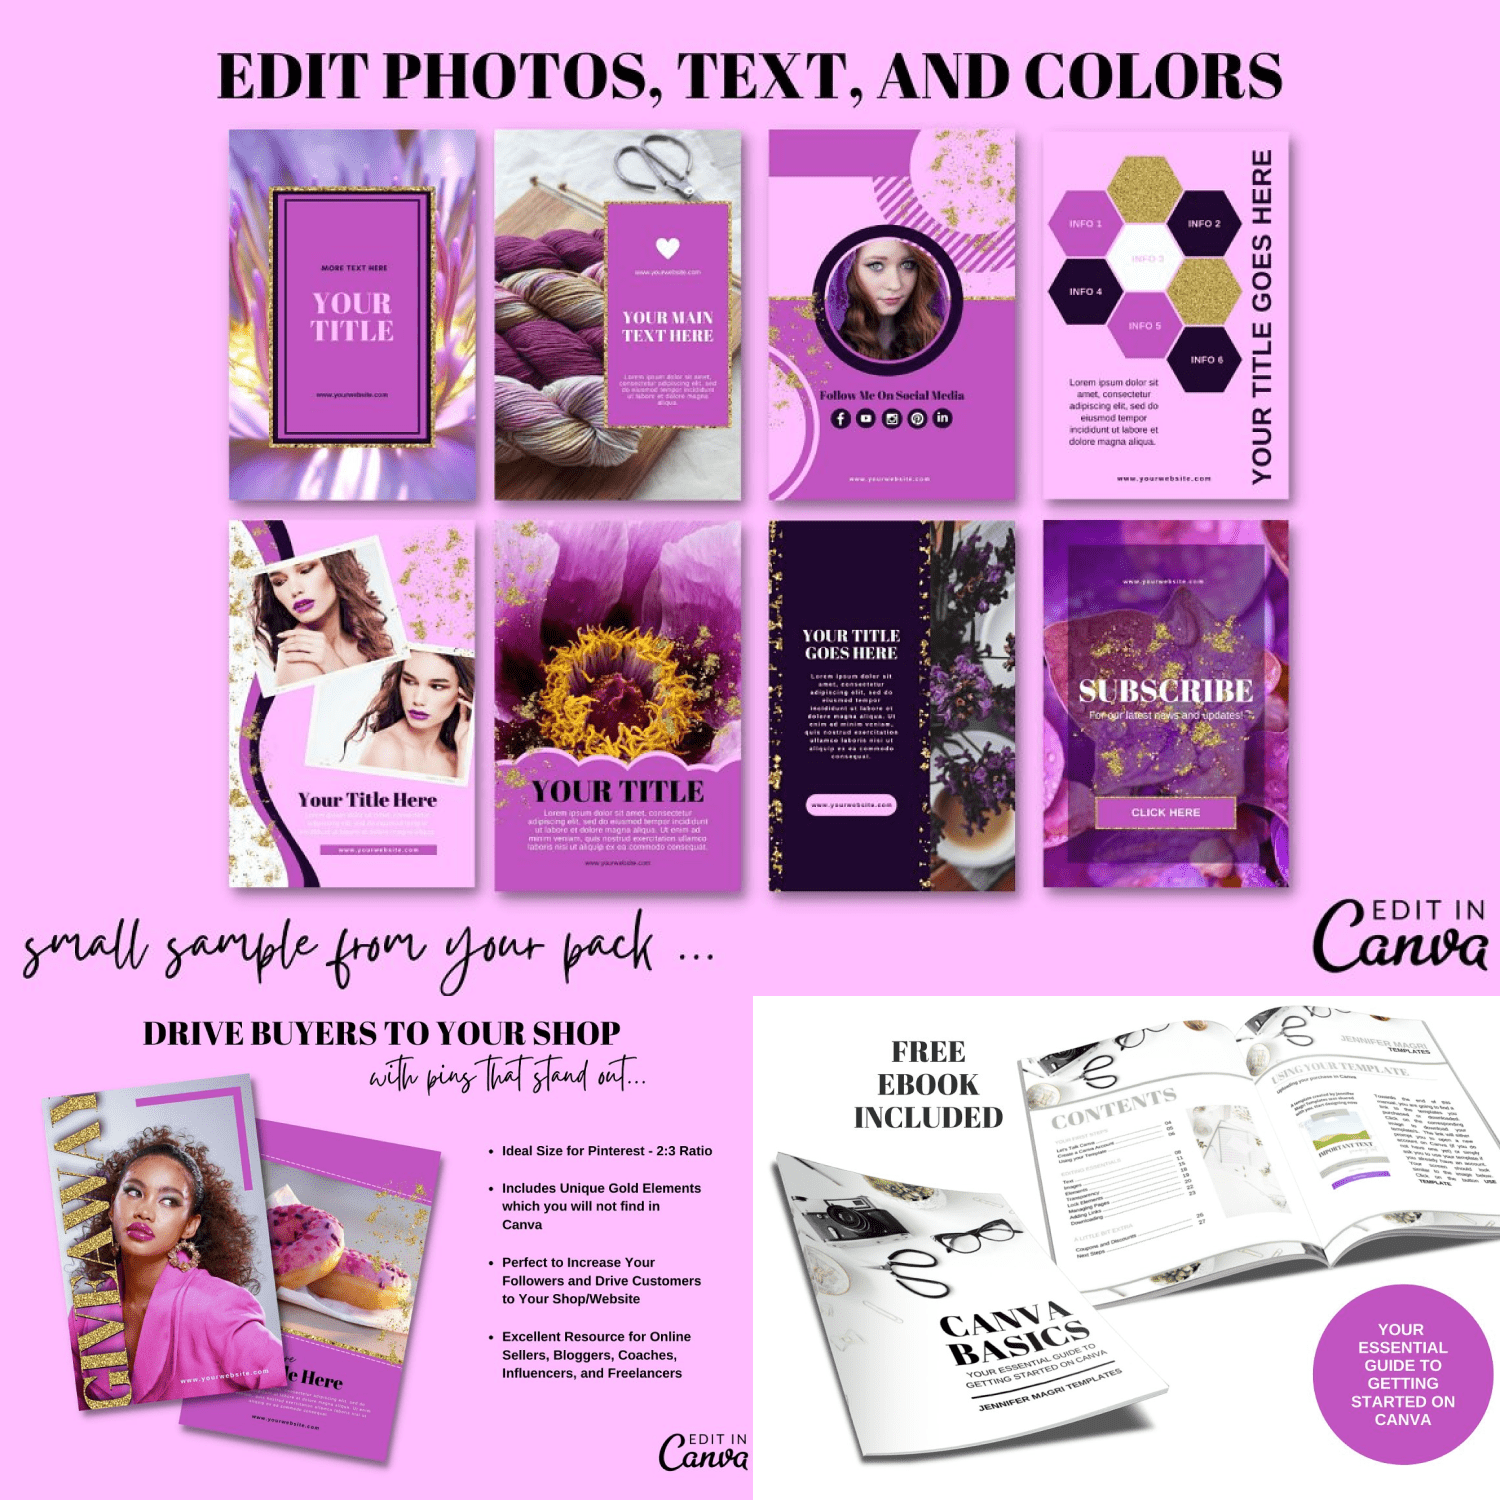 This bundle is a good choice for your visual content.